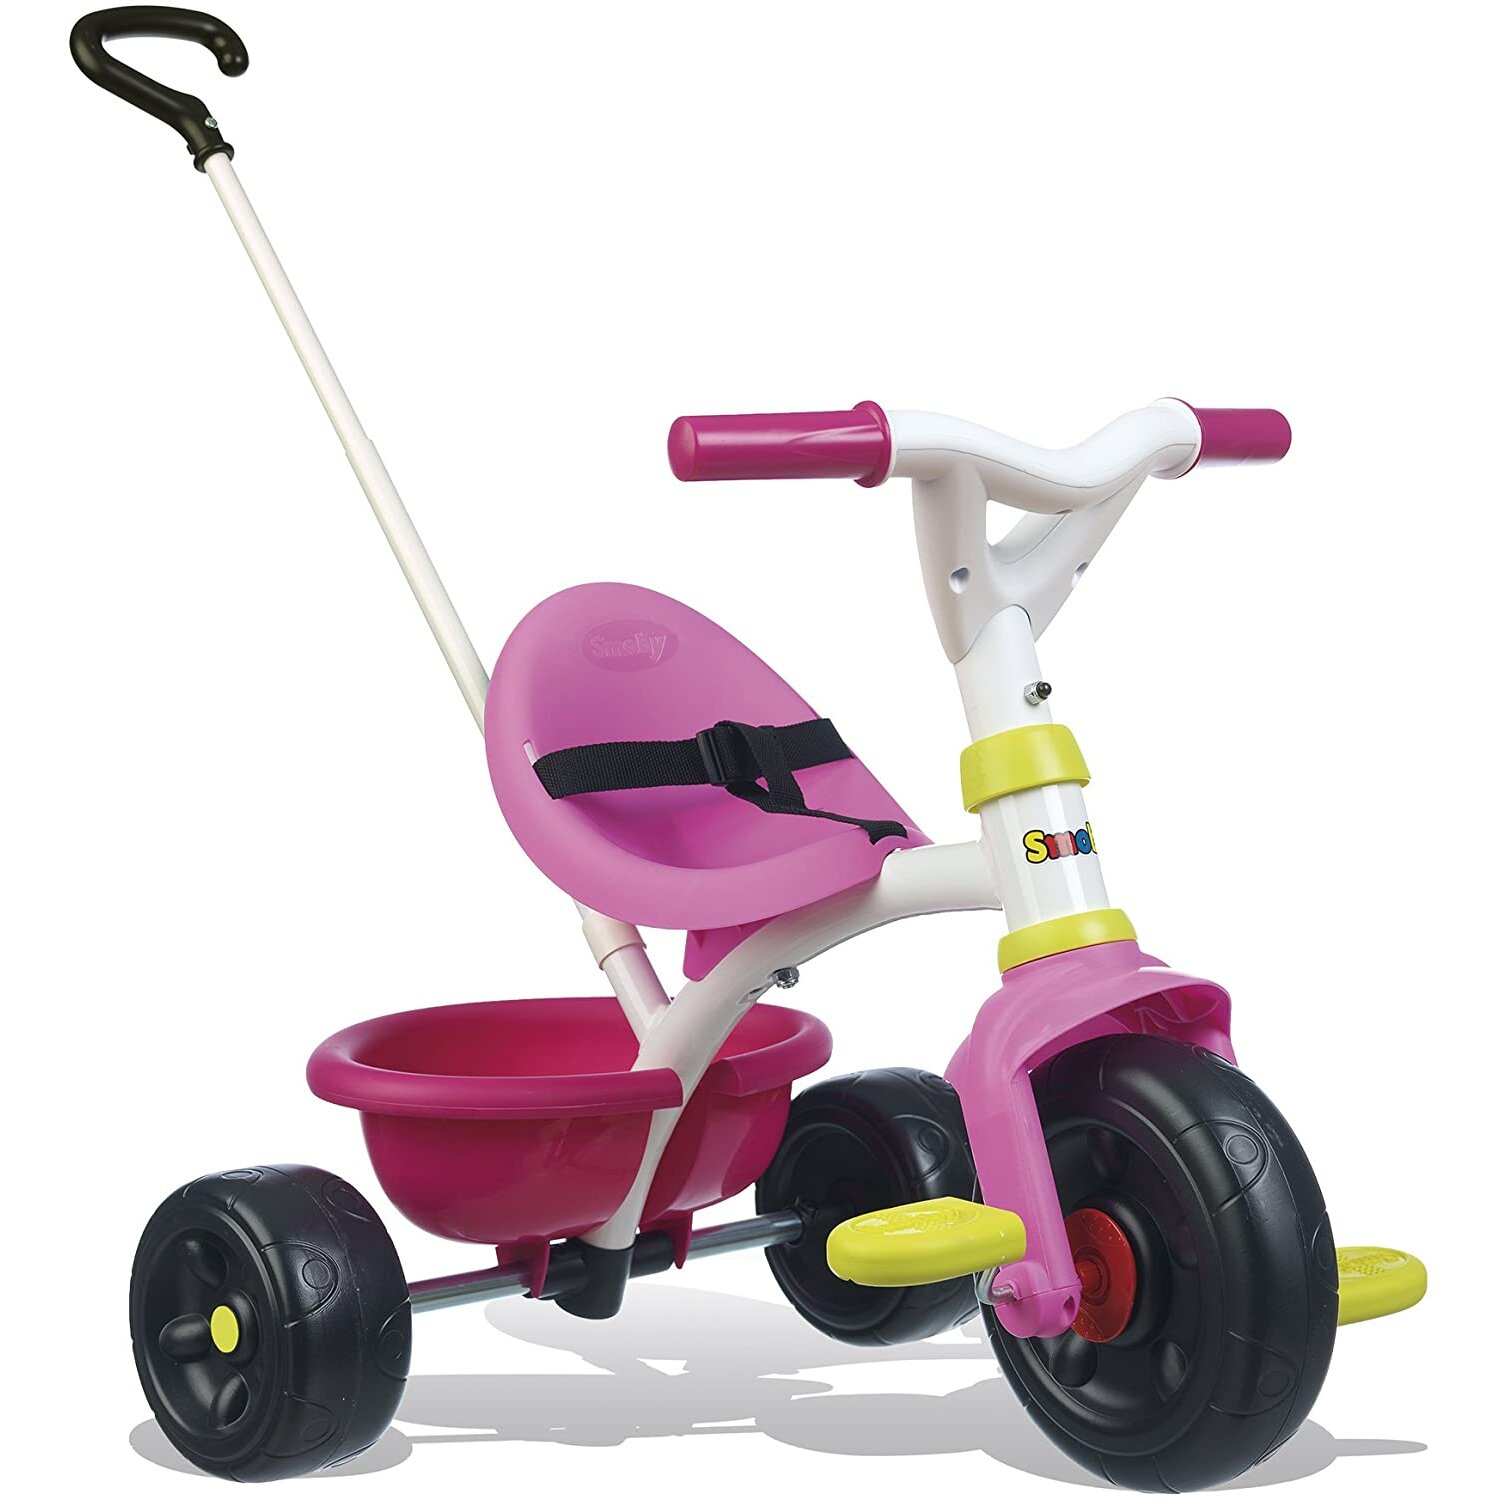 Smoby Push Along Trike with Parent Handle | Removable handle converts it to tricycle | Bright, stylish design | Ages: 15 months and up